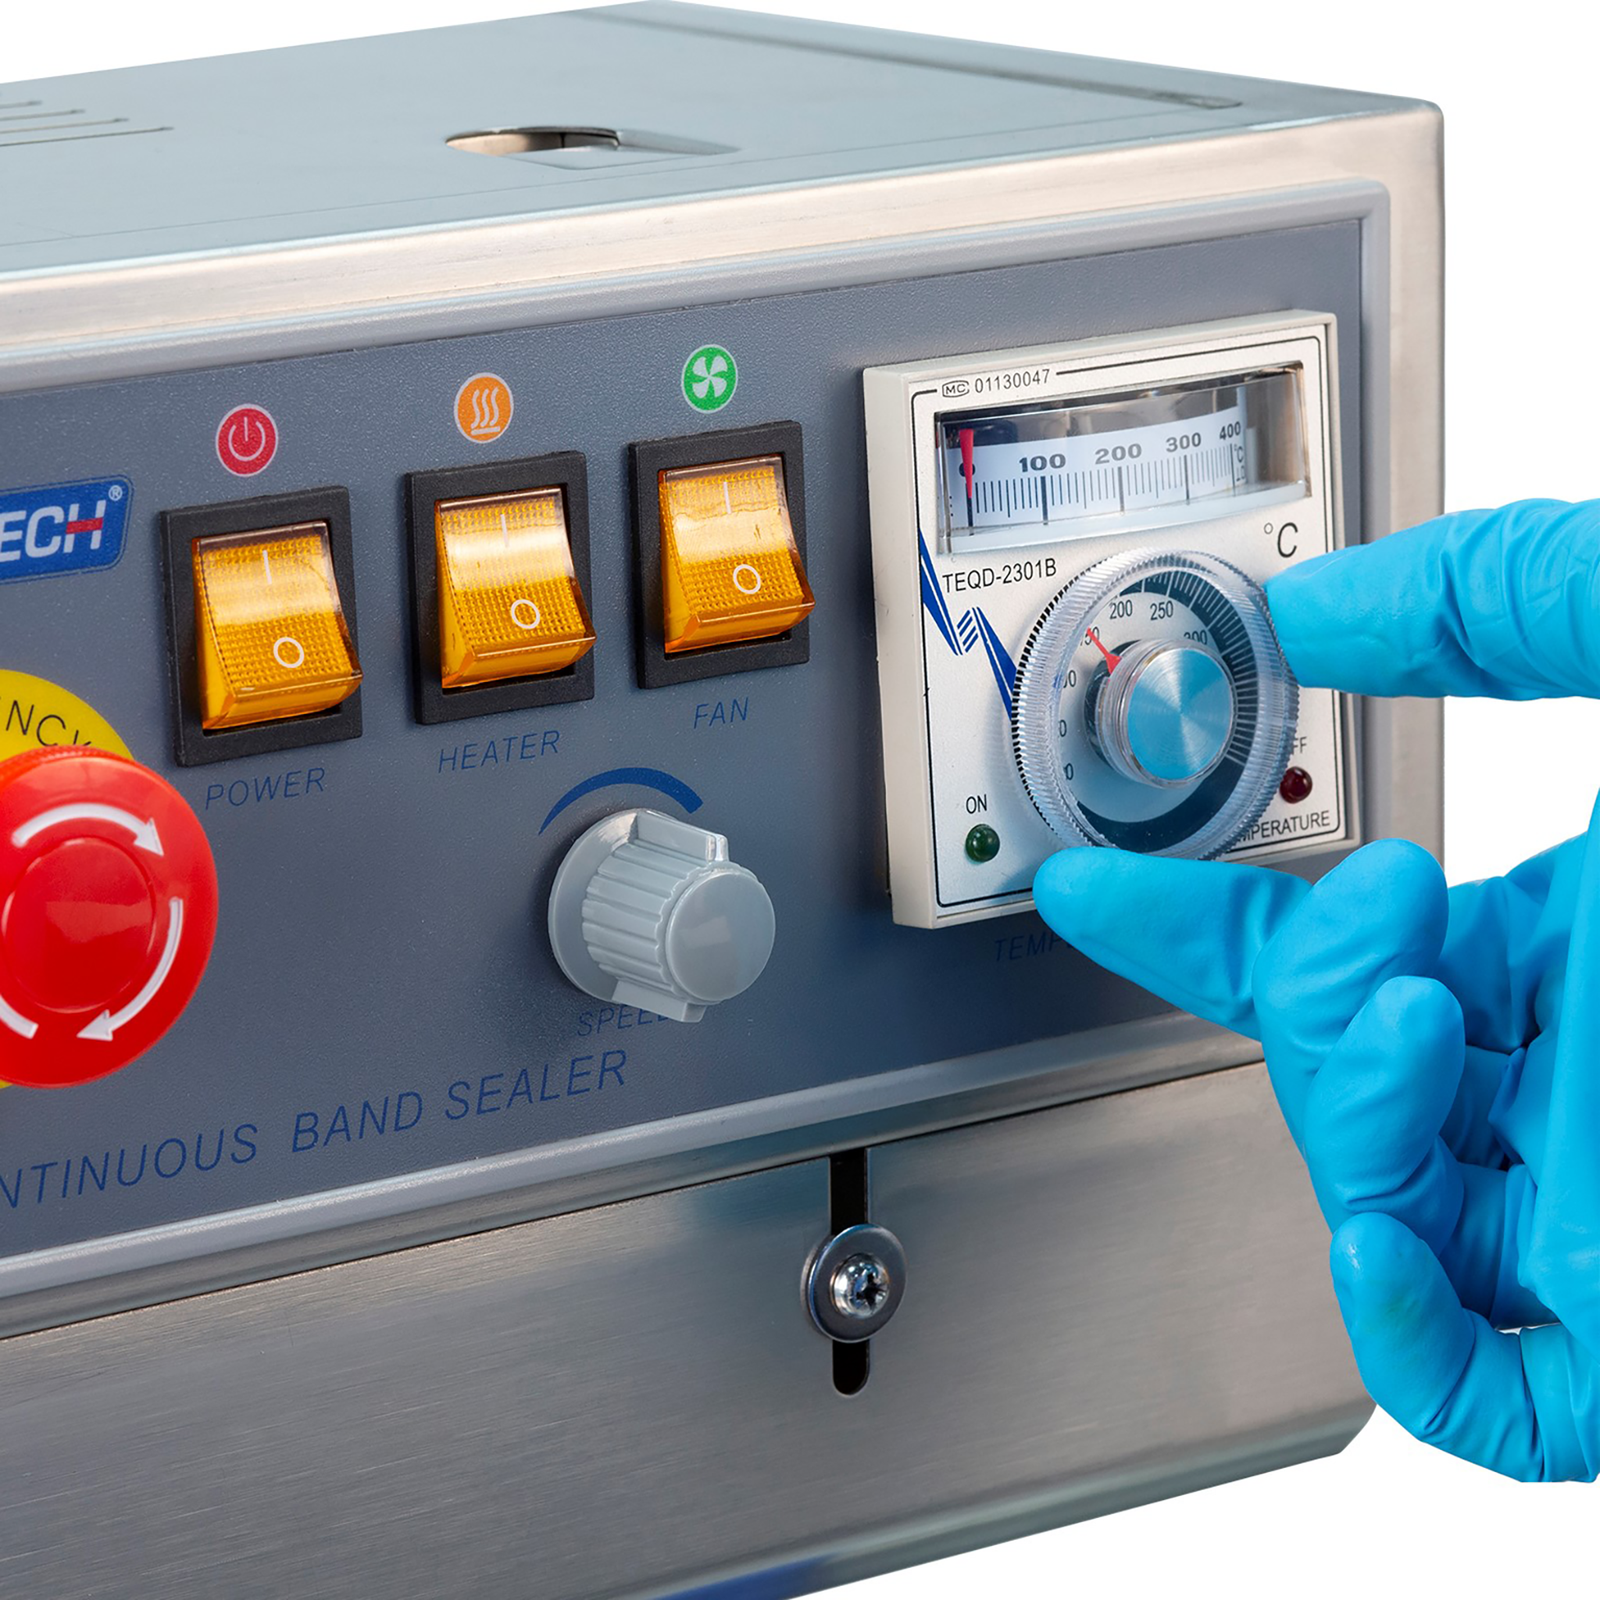 operator wearing blue gloves adjusting analog temperature control dial on the JORES TECHNOLOGIES® continuous band sealer